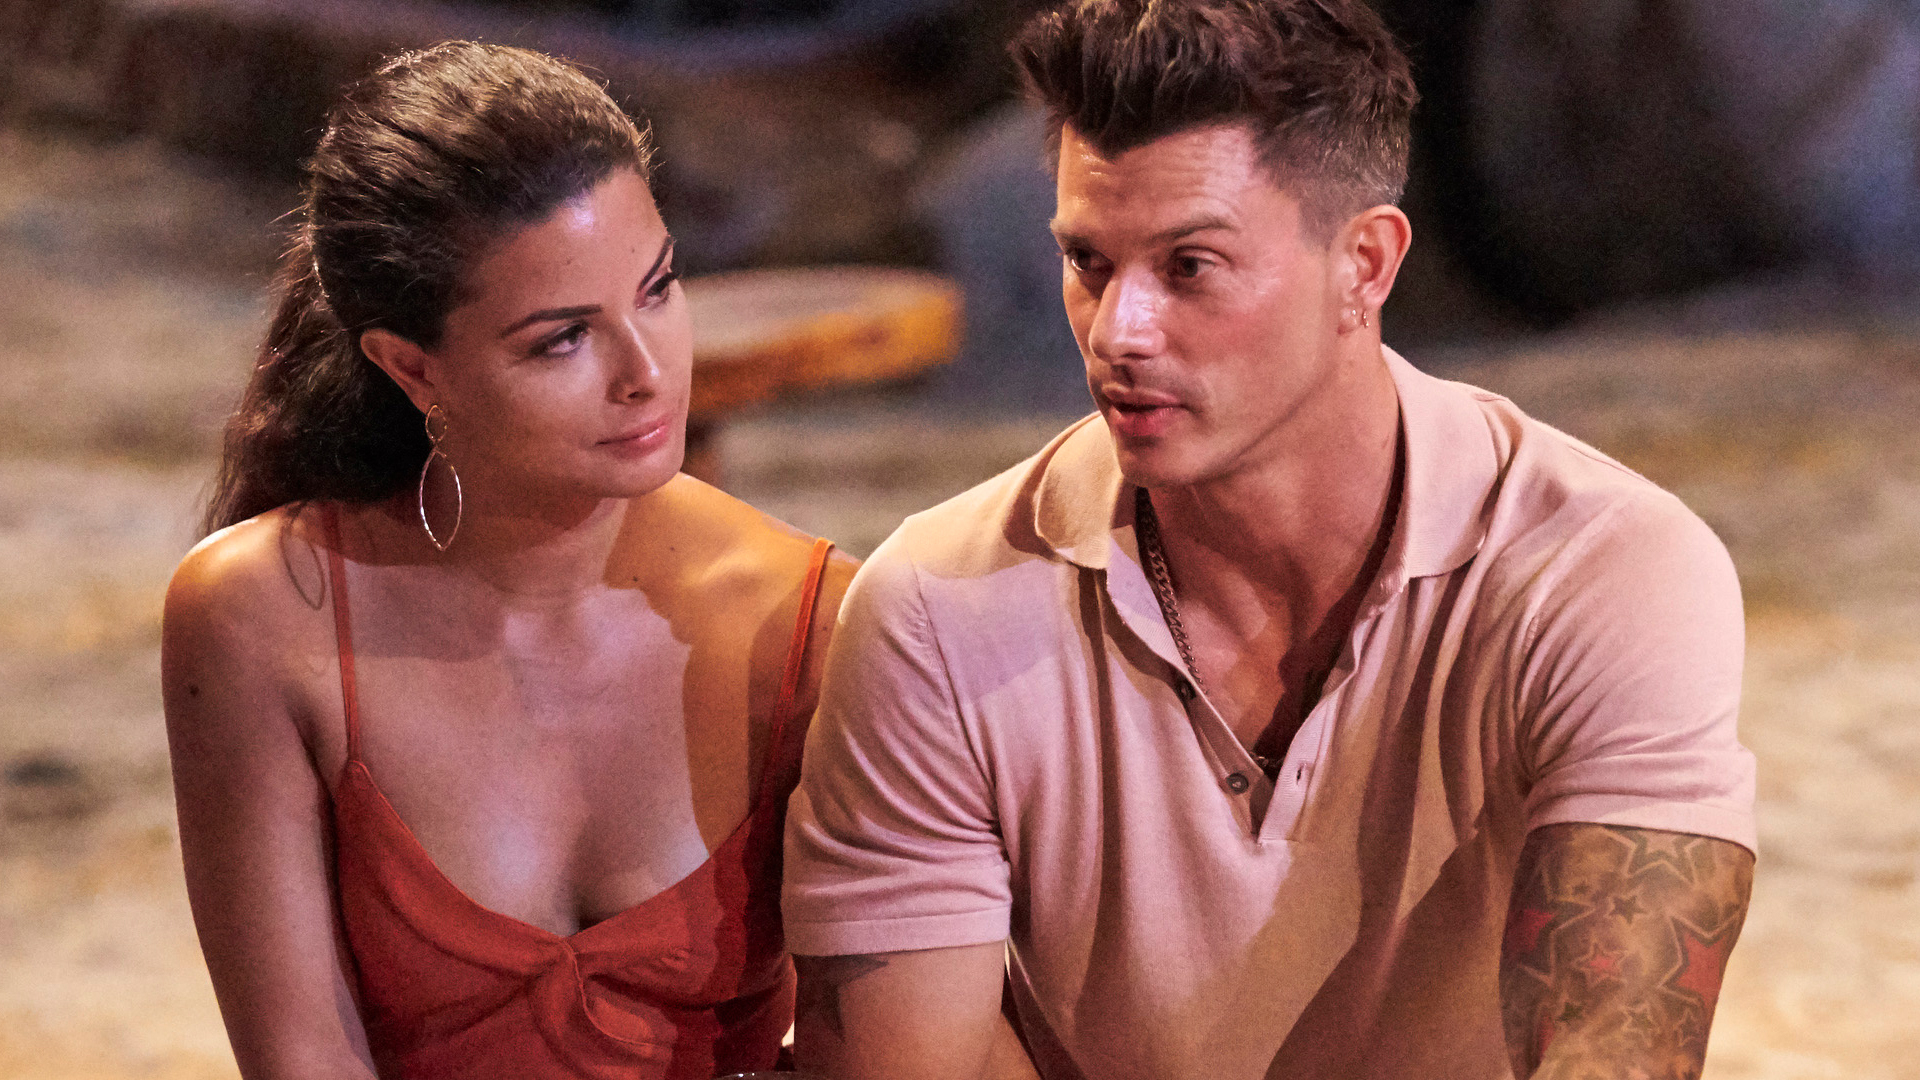 Mari Pepin-Solis and Kenny Braasch sit down together and talk in ‘Bachelor in Paradise’ 2021